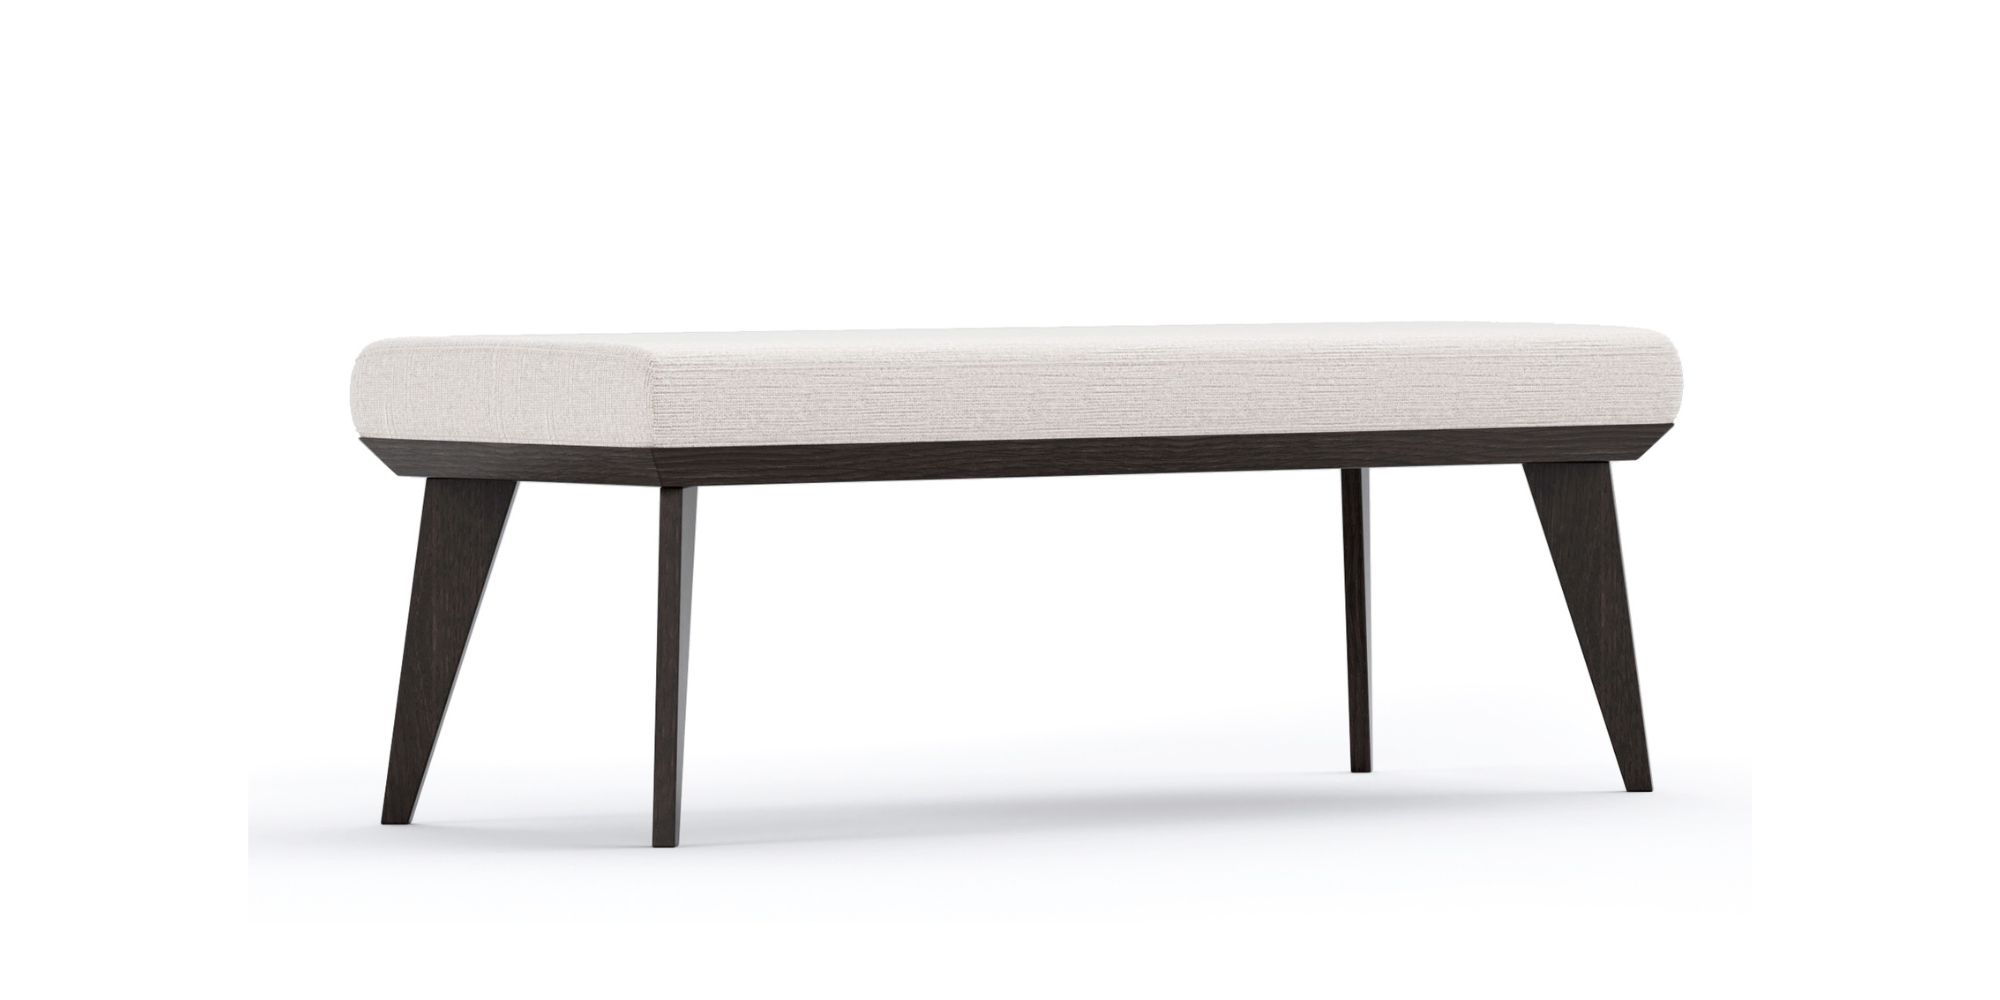 Largo Lounger in Outdoor Loungers for Largo collection